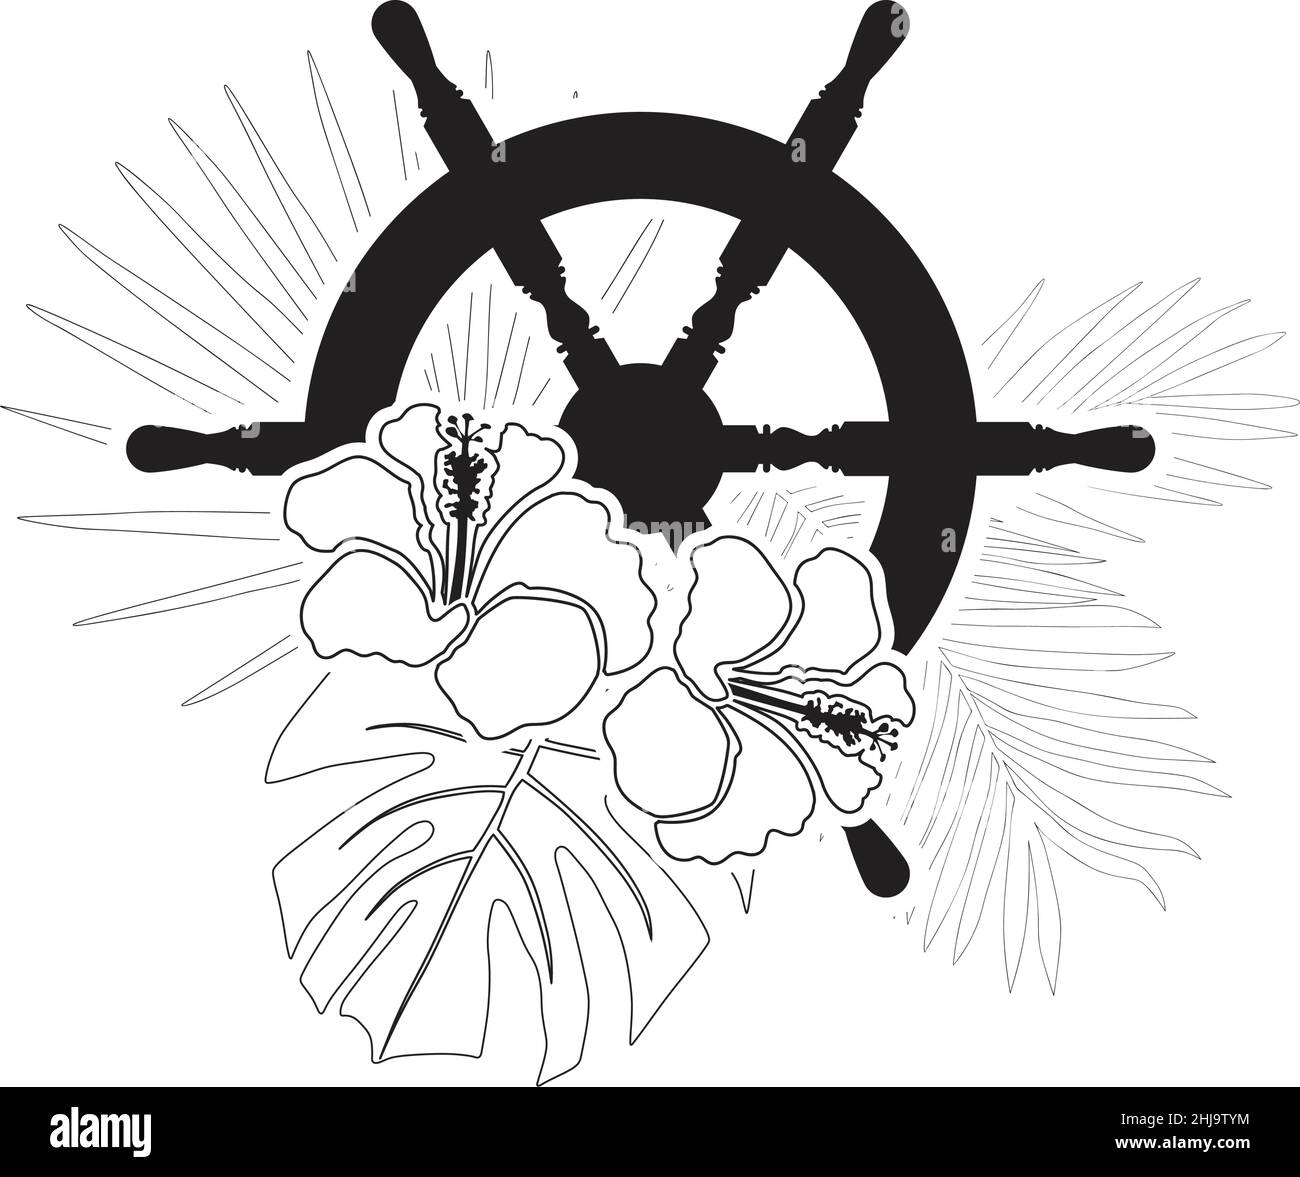 steering wheel and palm leaves Stock Vector